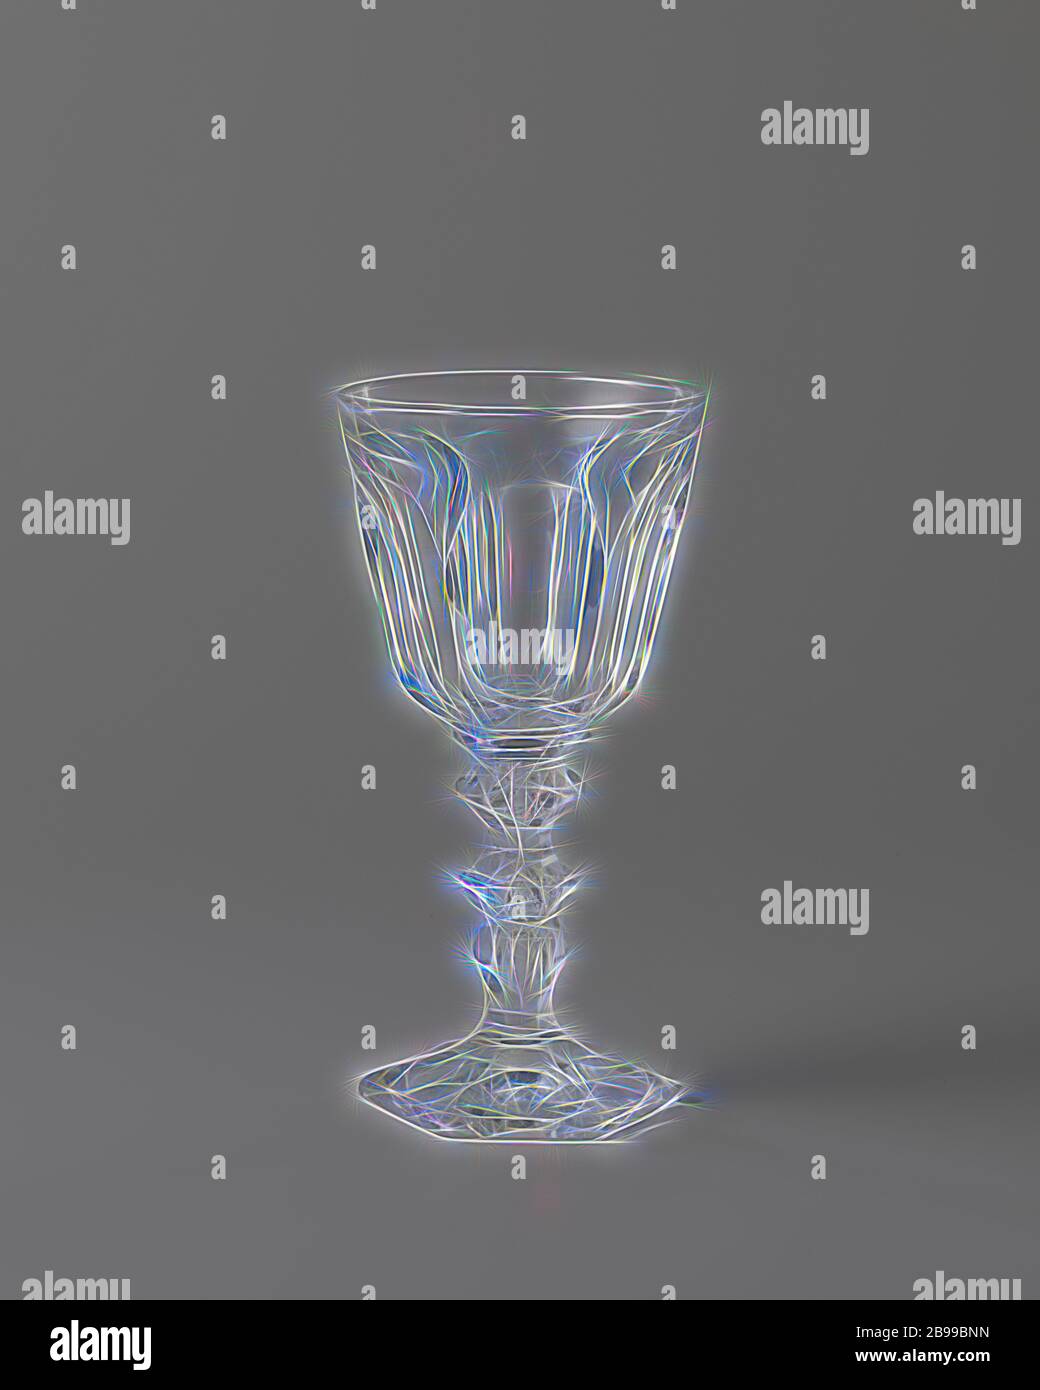 Goblet with cut elips, Hexagonal, conical foot, baluster-shaped trunk with an enclosed bubble and two knots. Conical chalice rounded at the bottom. Faceted cut base and stem, chalice cut into ellipses., anonymous, France, c. 1850 - c. 1875, glass, grinding, h 18.1 cm × d 9.2 cm, Reimagined by Gibon, design of warm cheerful glowing of brightness and light rays radiance. Classic art reinvented with a modern twist. Photography inspired by futurism, embracing dynamic energy of modern technology, movement, speed and revolutionize culture. Stock Photo